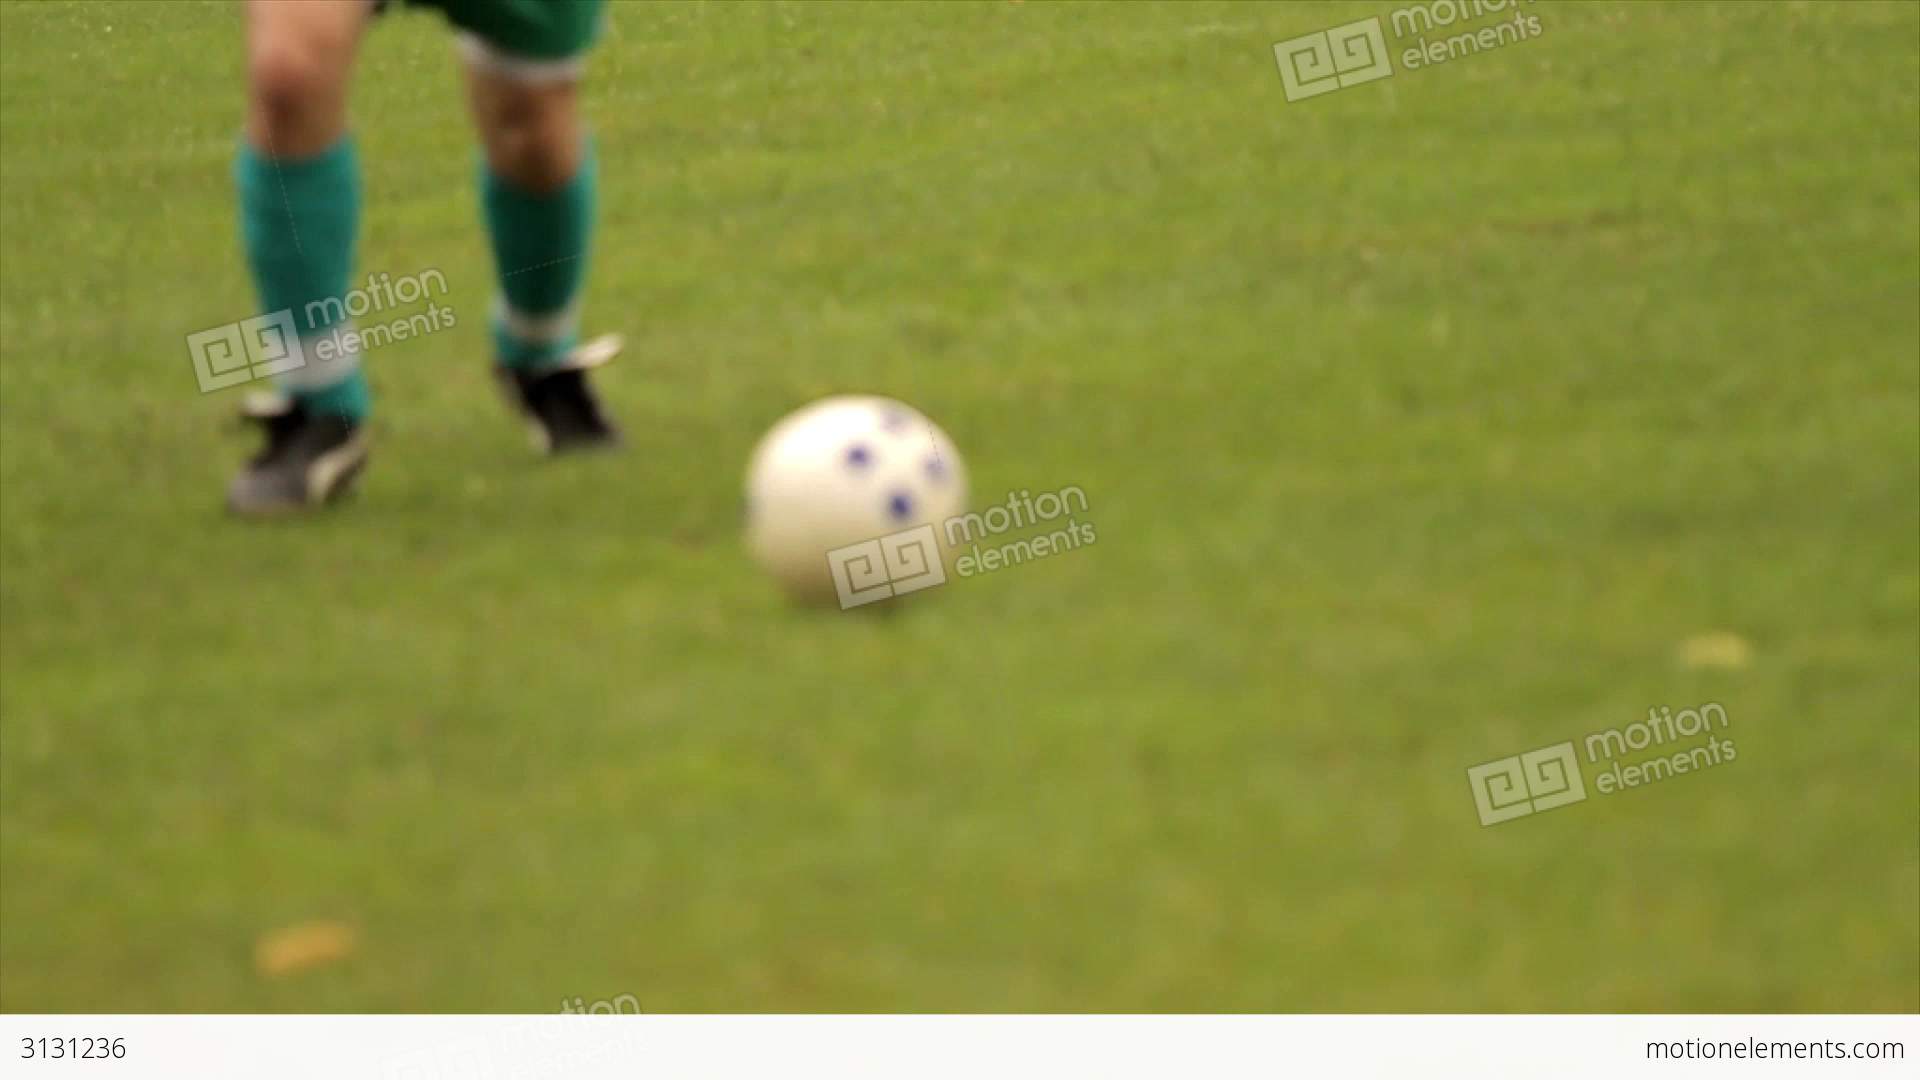 Football Game, Football Match Stock video footage | 3131236